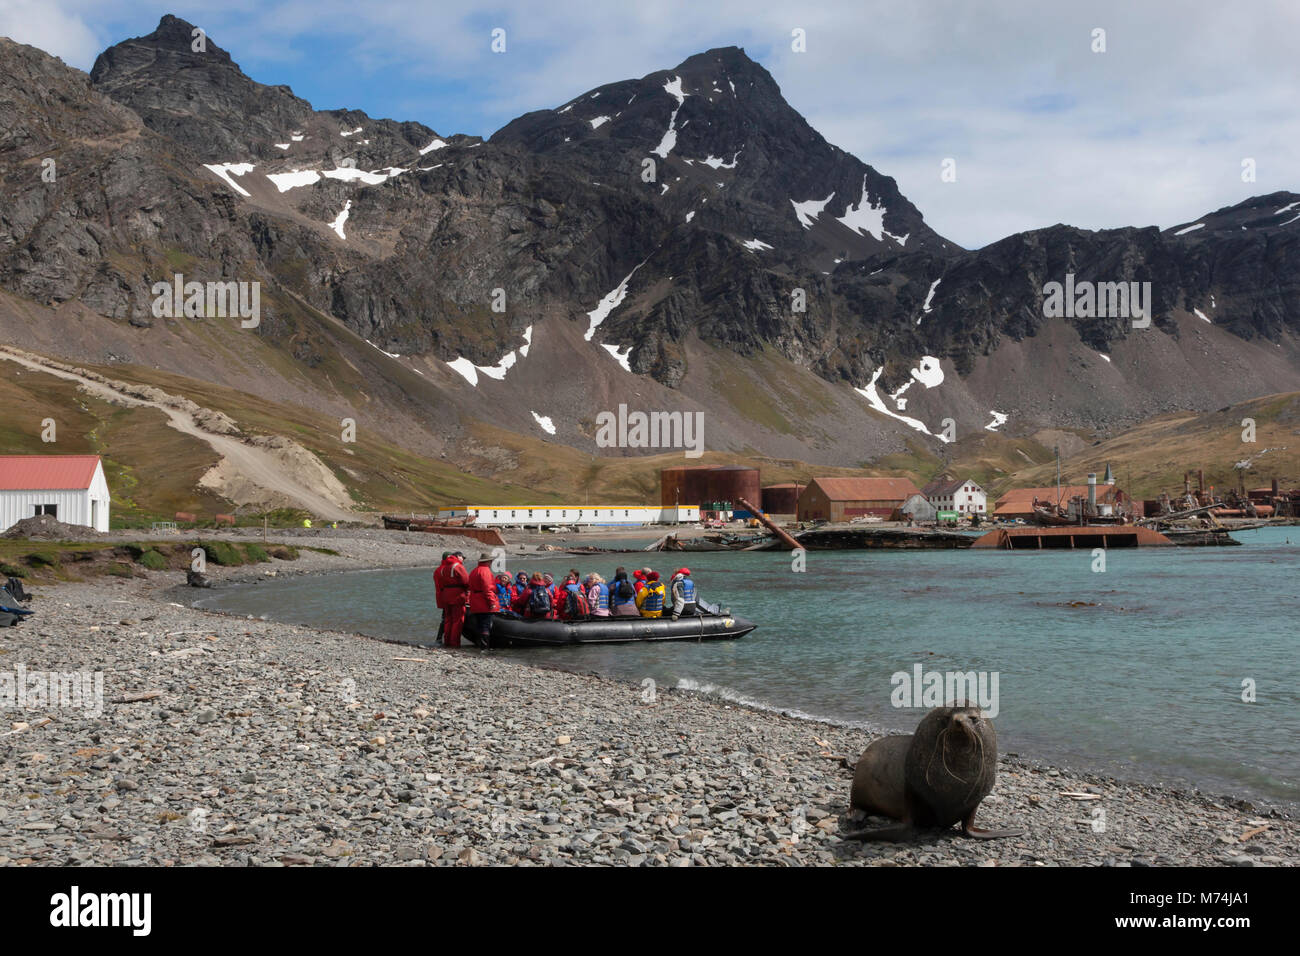 Cruise Eco-tourists arriving by zodiac boat at historic Antarctic whaling station Grytviken Harbor South Georgia, Hooker sea lion posed on rocky beach Stock Photo